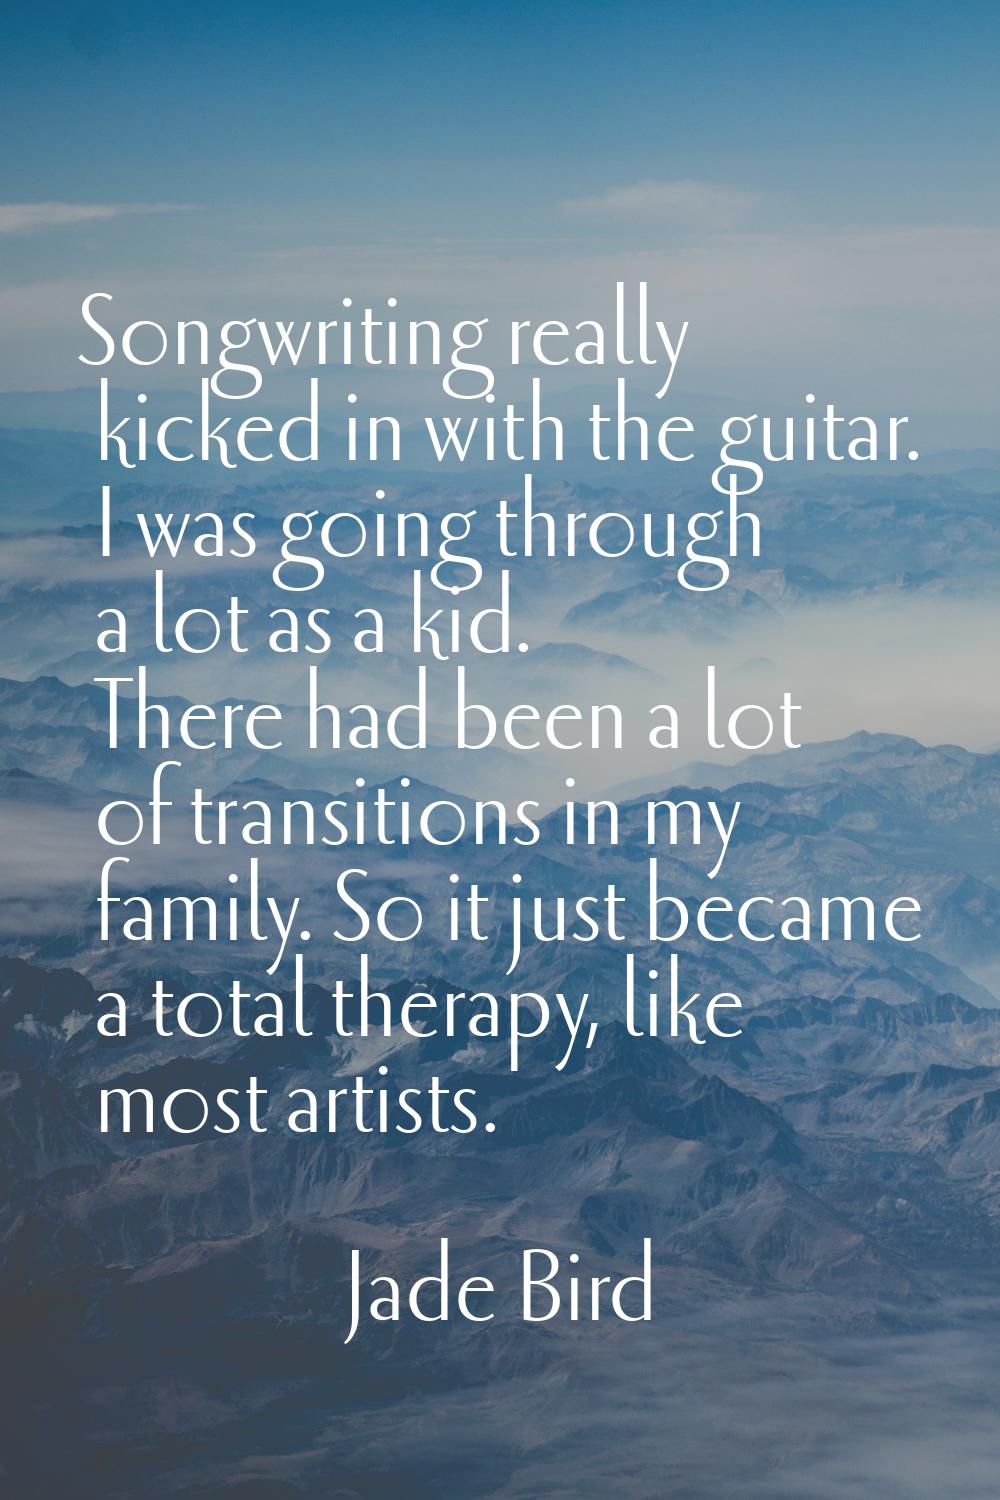 Songwriting really kicked in with the guitar. I was going through a lot as a kid. There had been a 